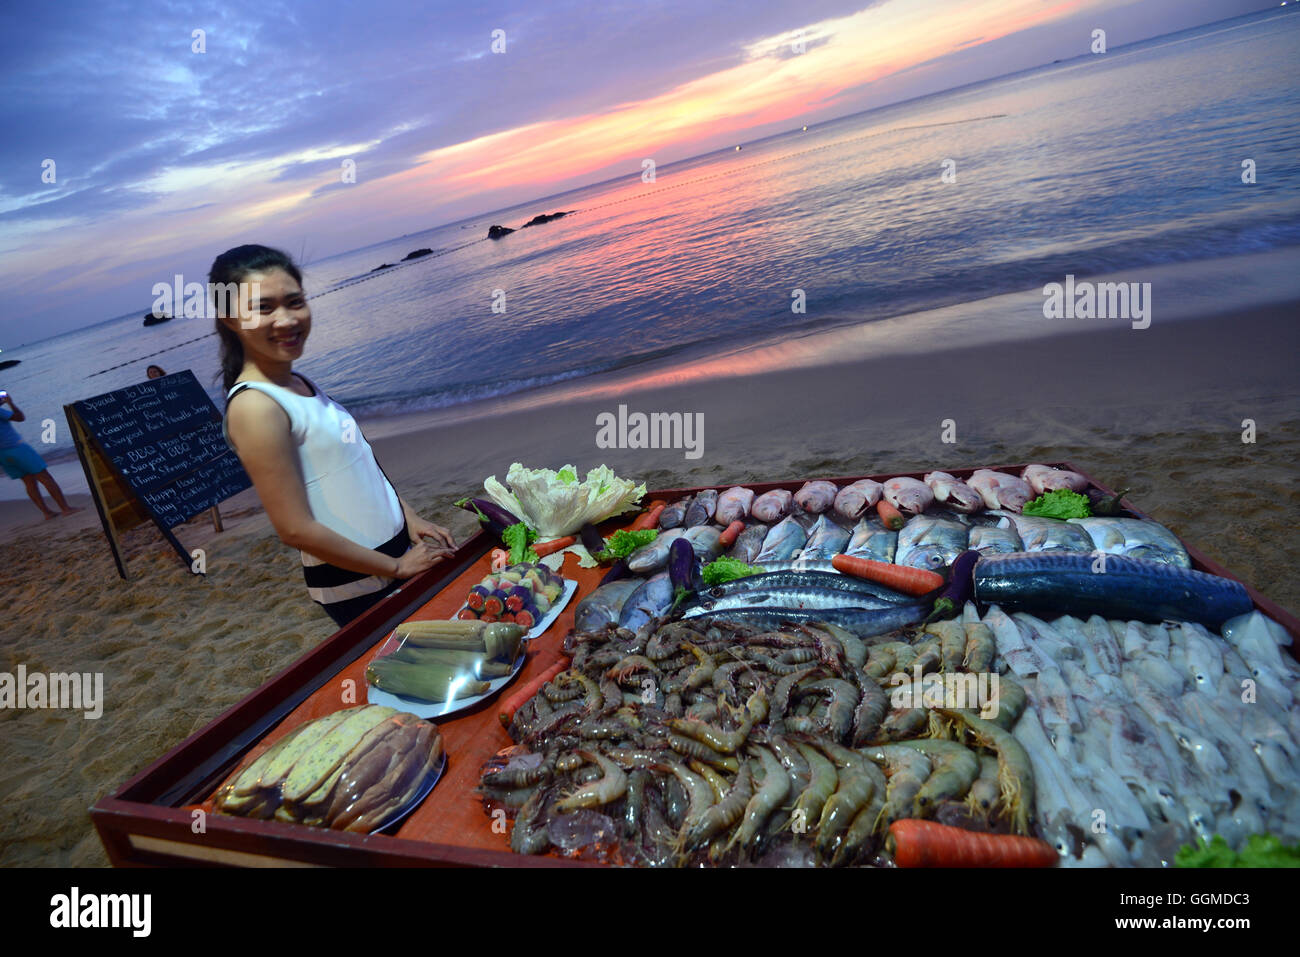 Woman selling fish, sunset at Longbeach on the island of Phu Quoc, Vietnam, Asia Stock Photo